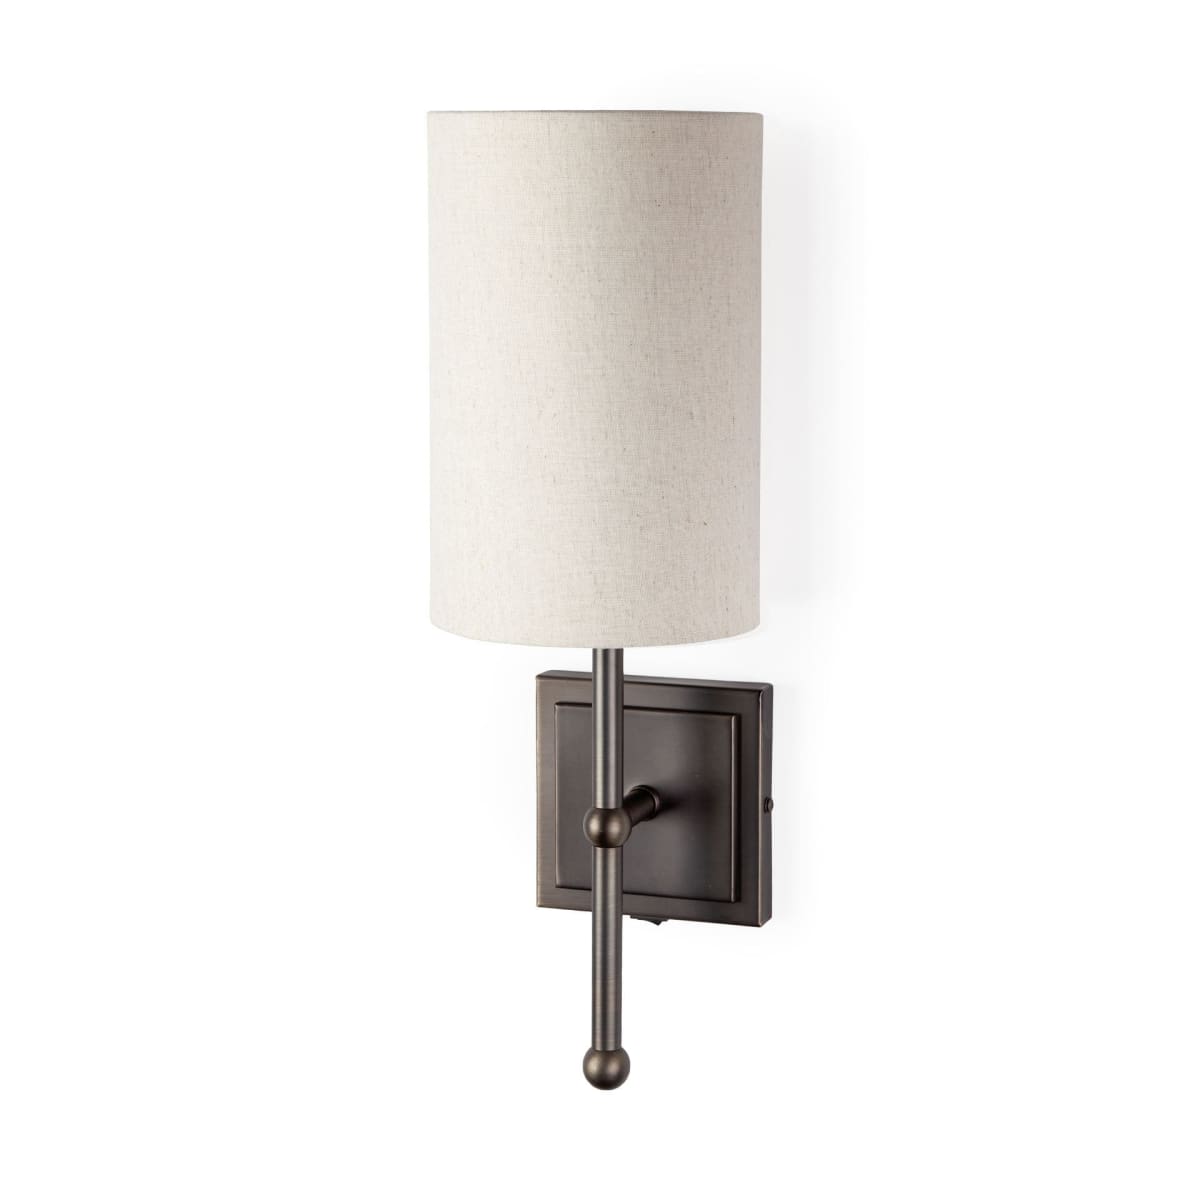 Bourgeois Wall Sconce Brown Metal | White Shade - wall-fixtures